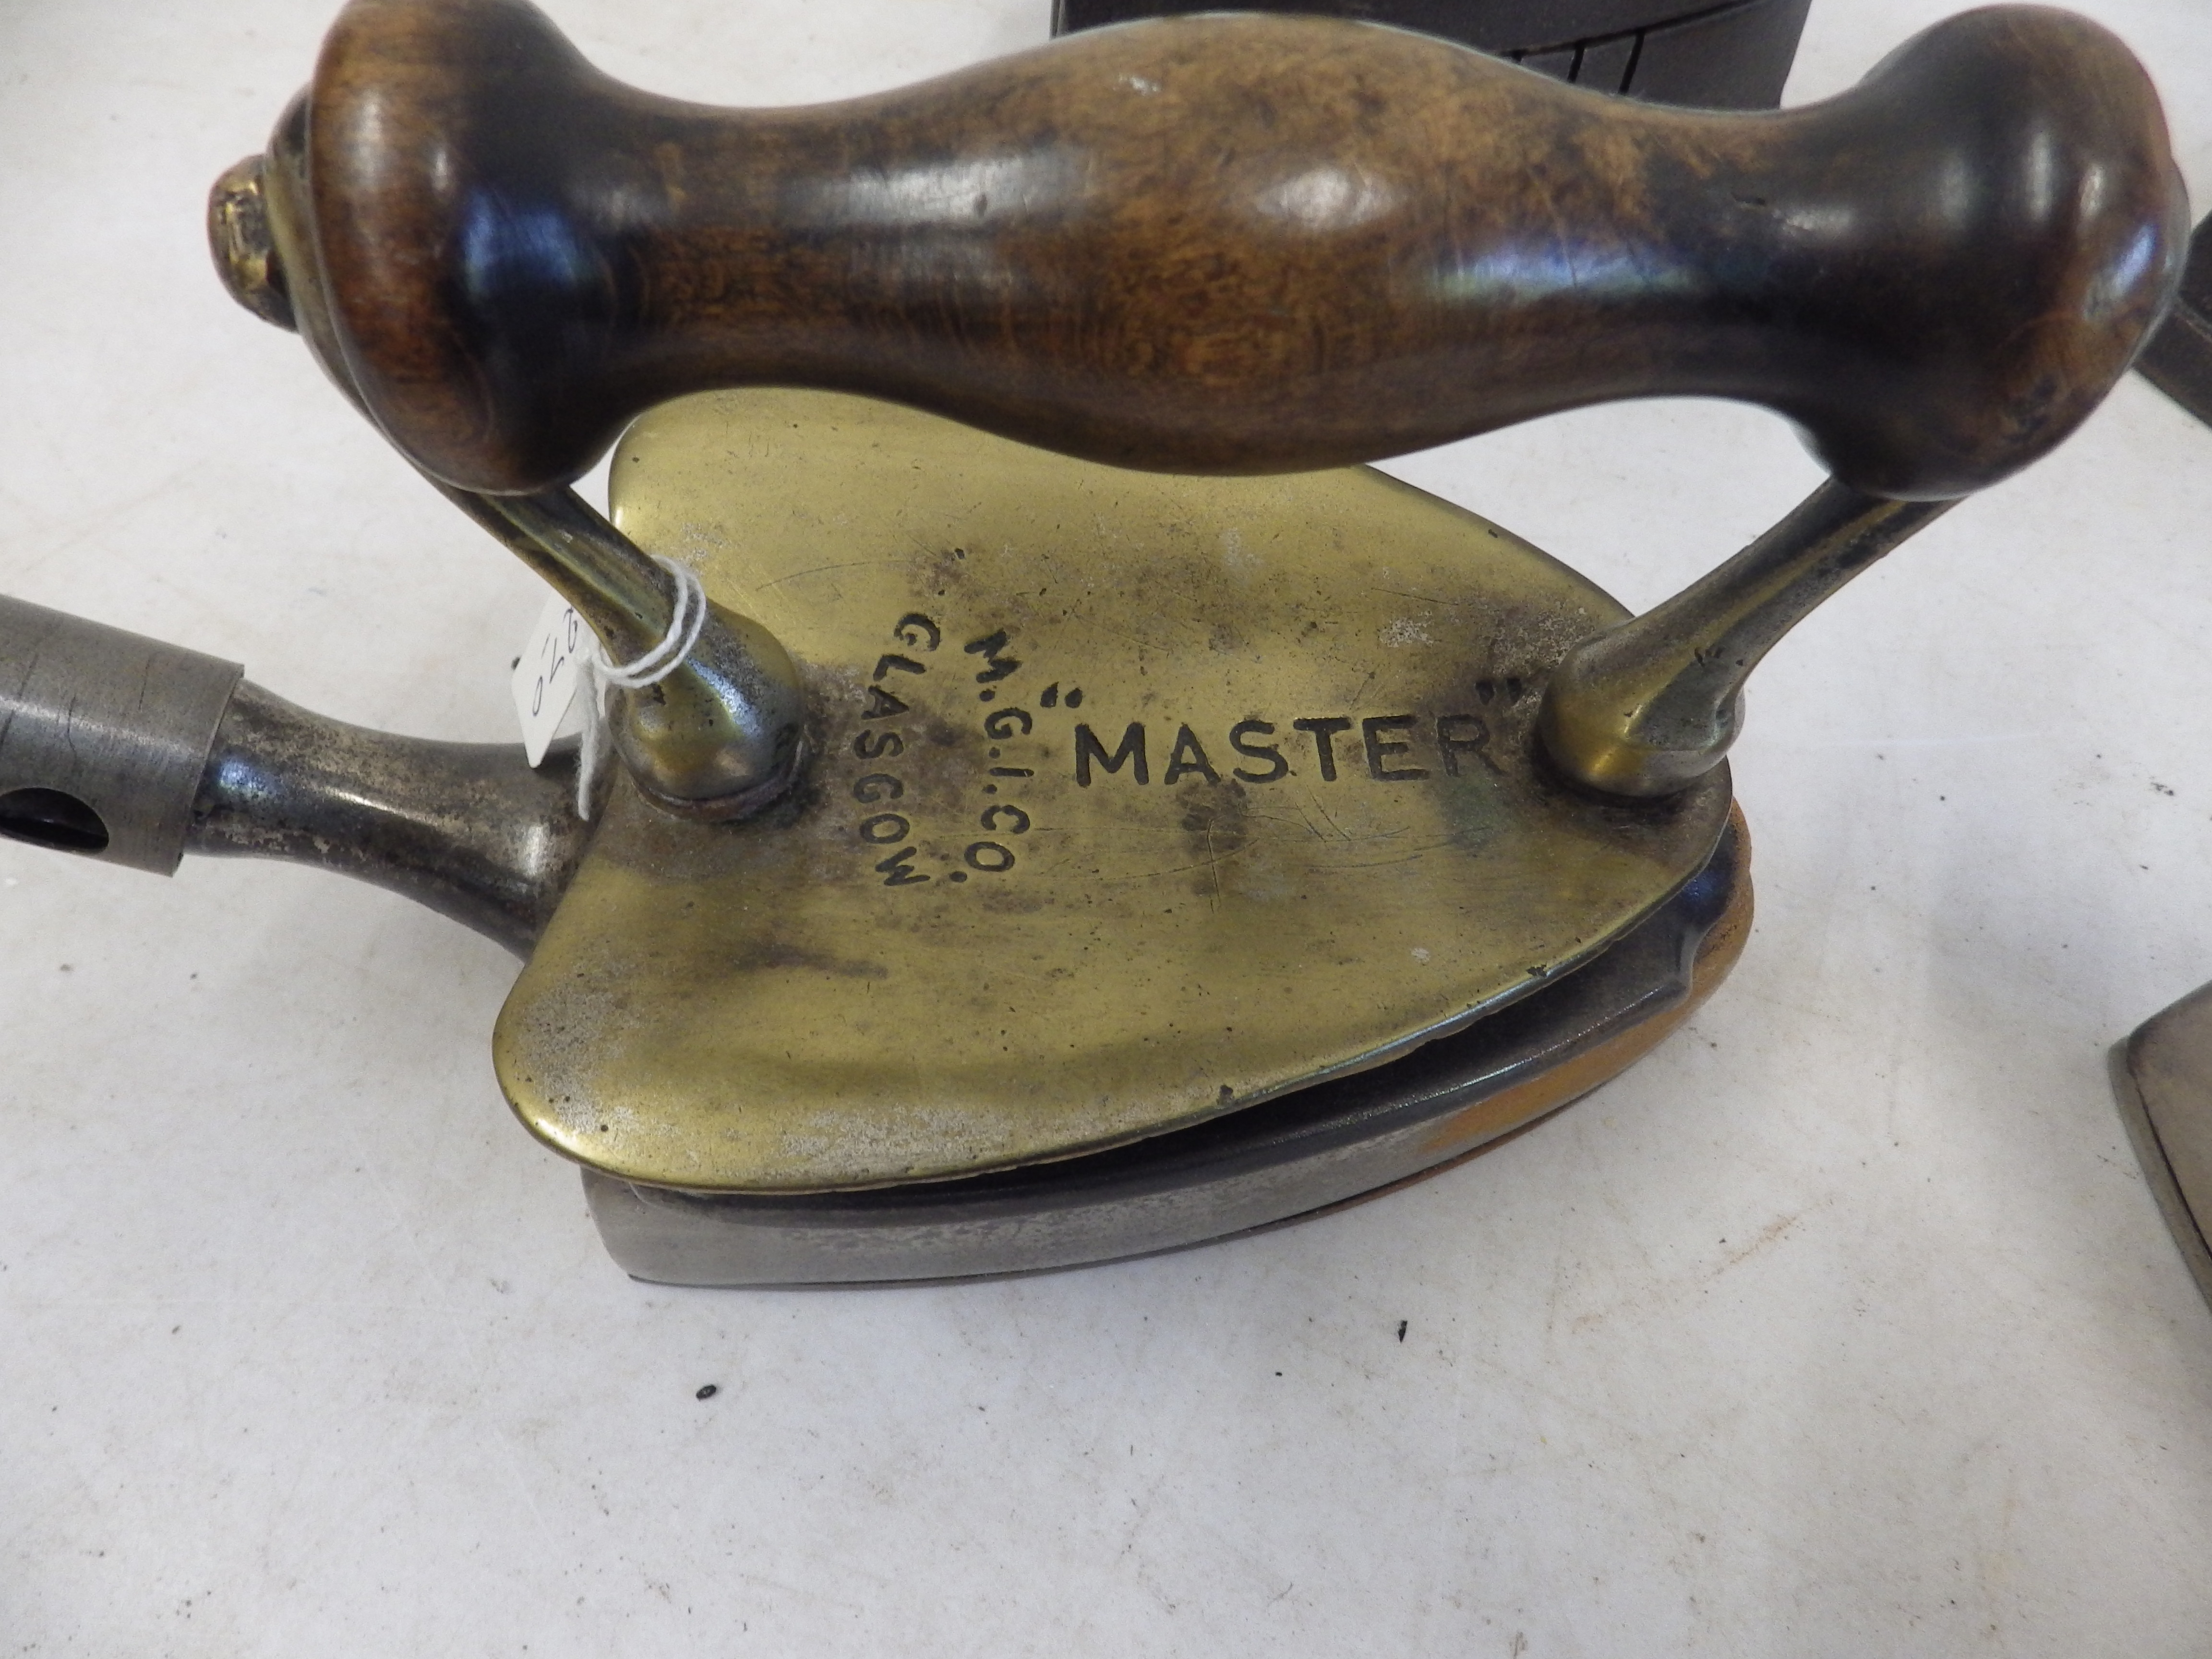 2 M G I Co Glasgow Master gas irons with copper/brass heat shields together with 2 Lister Bros No. - Bild 3 aus 6